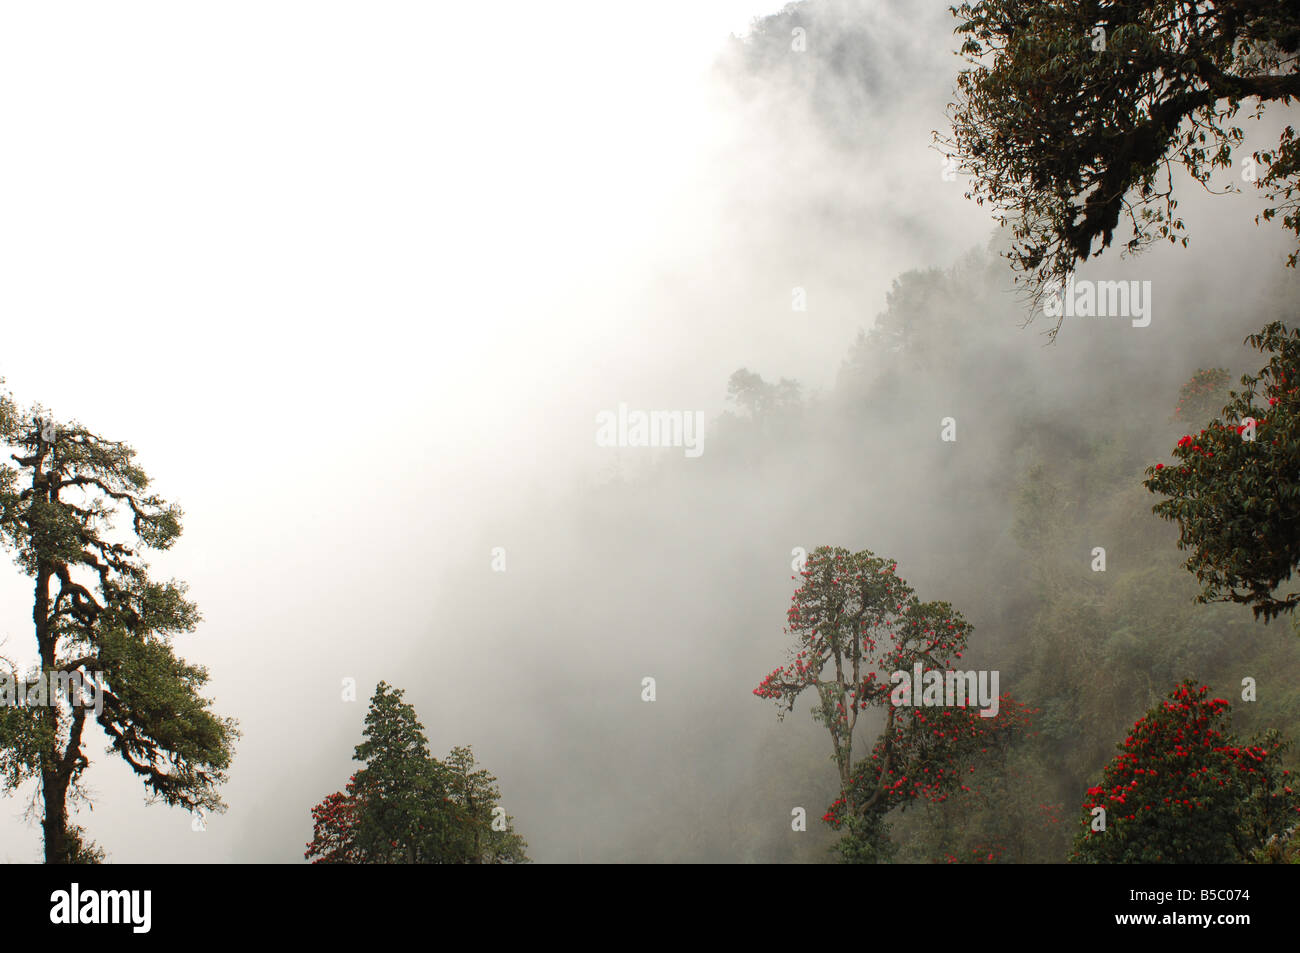 Mist rolls in over the Rhododendron trees in the Everest region of the Nepal Himalaya Stock Photo